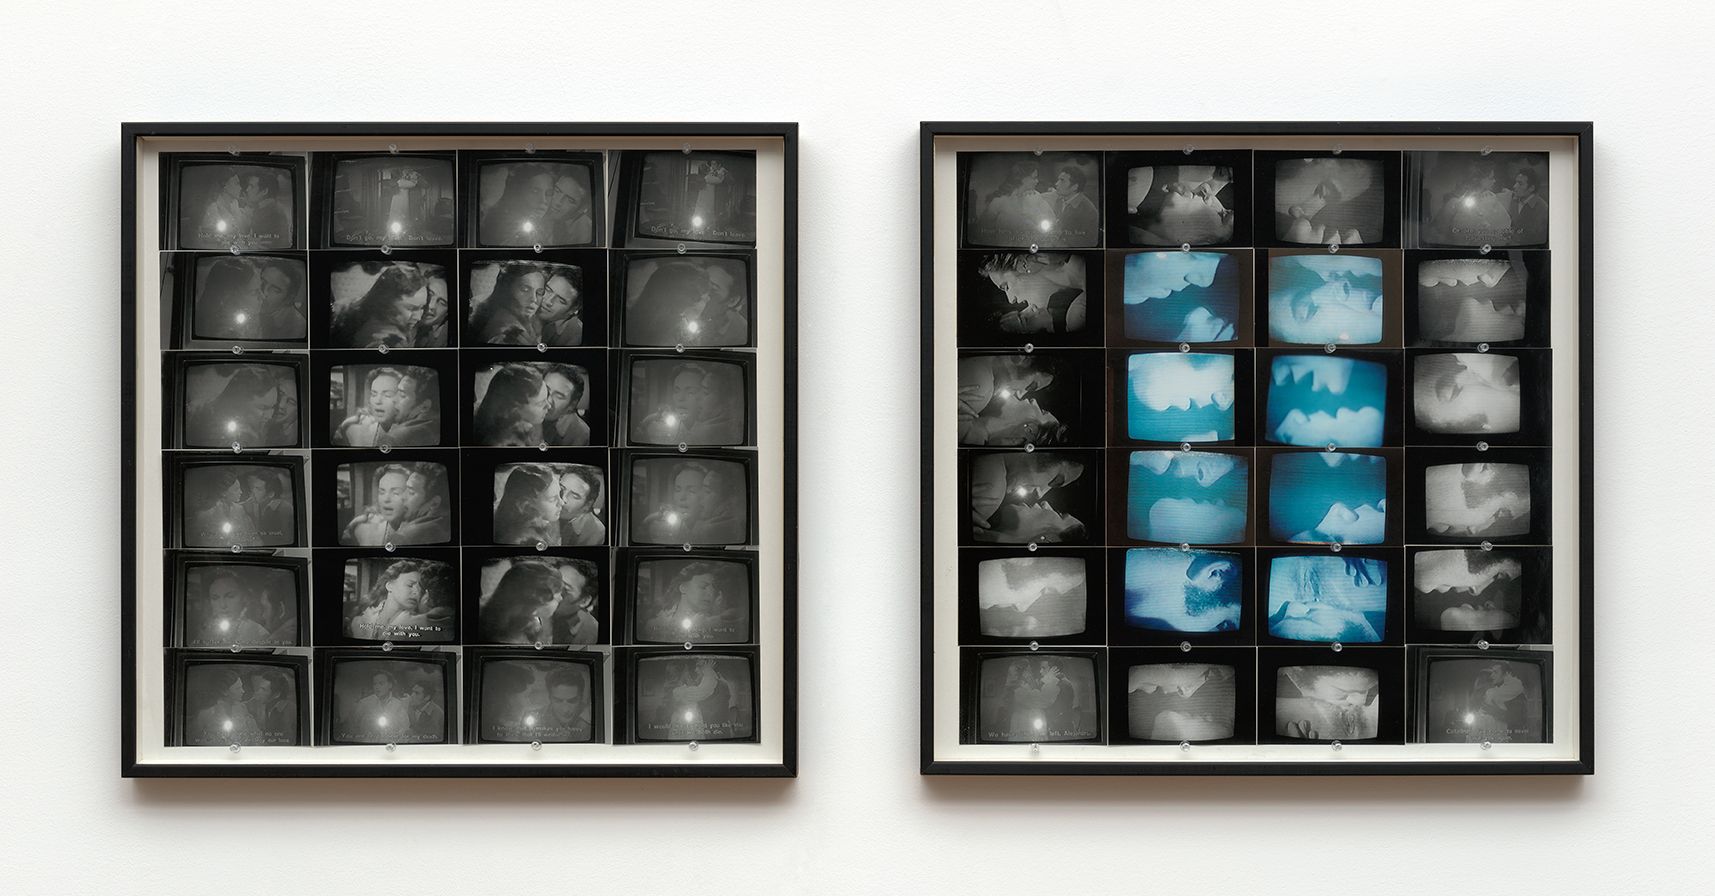 Ellen Cantor, Hold Me My Love, I Want to Die With You, 1996, photo collage, diptych, framed, 27 x 26 1/2 in. each, unique, EC_FP3564